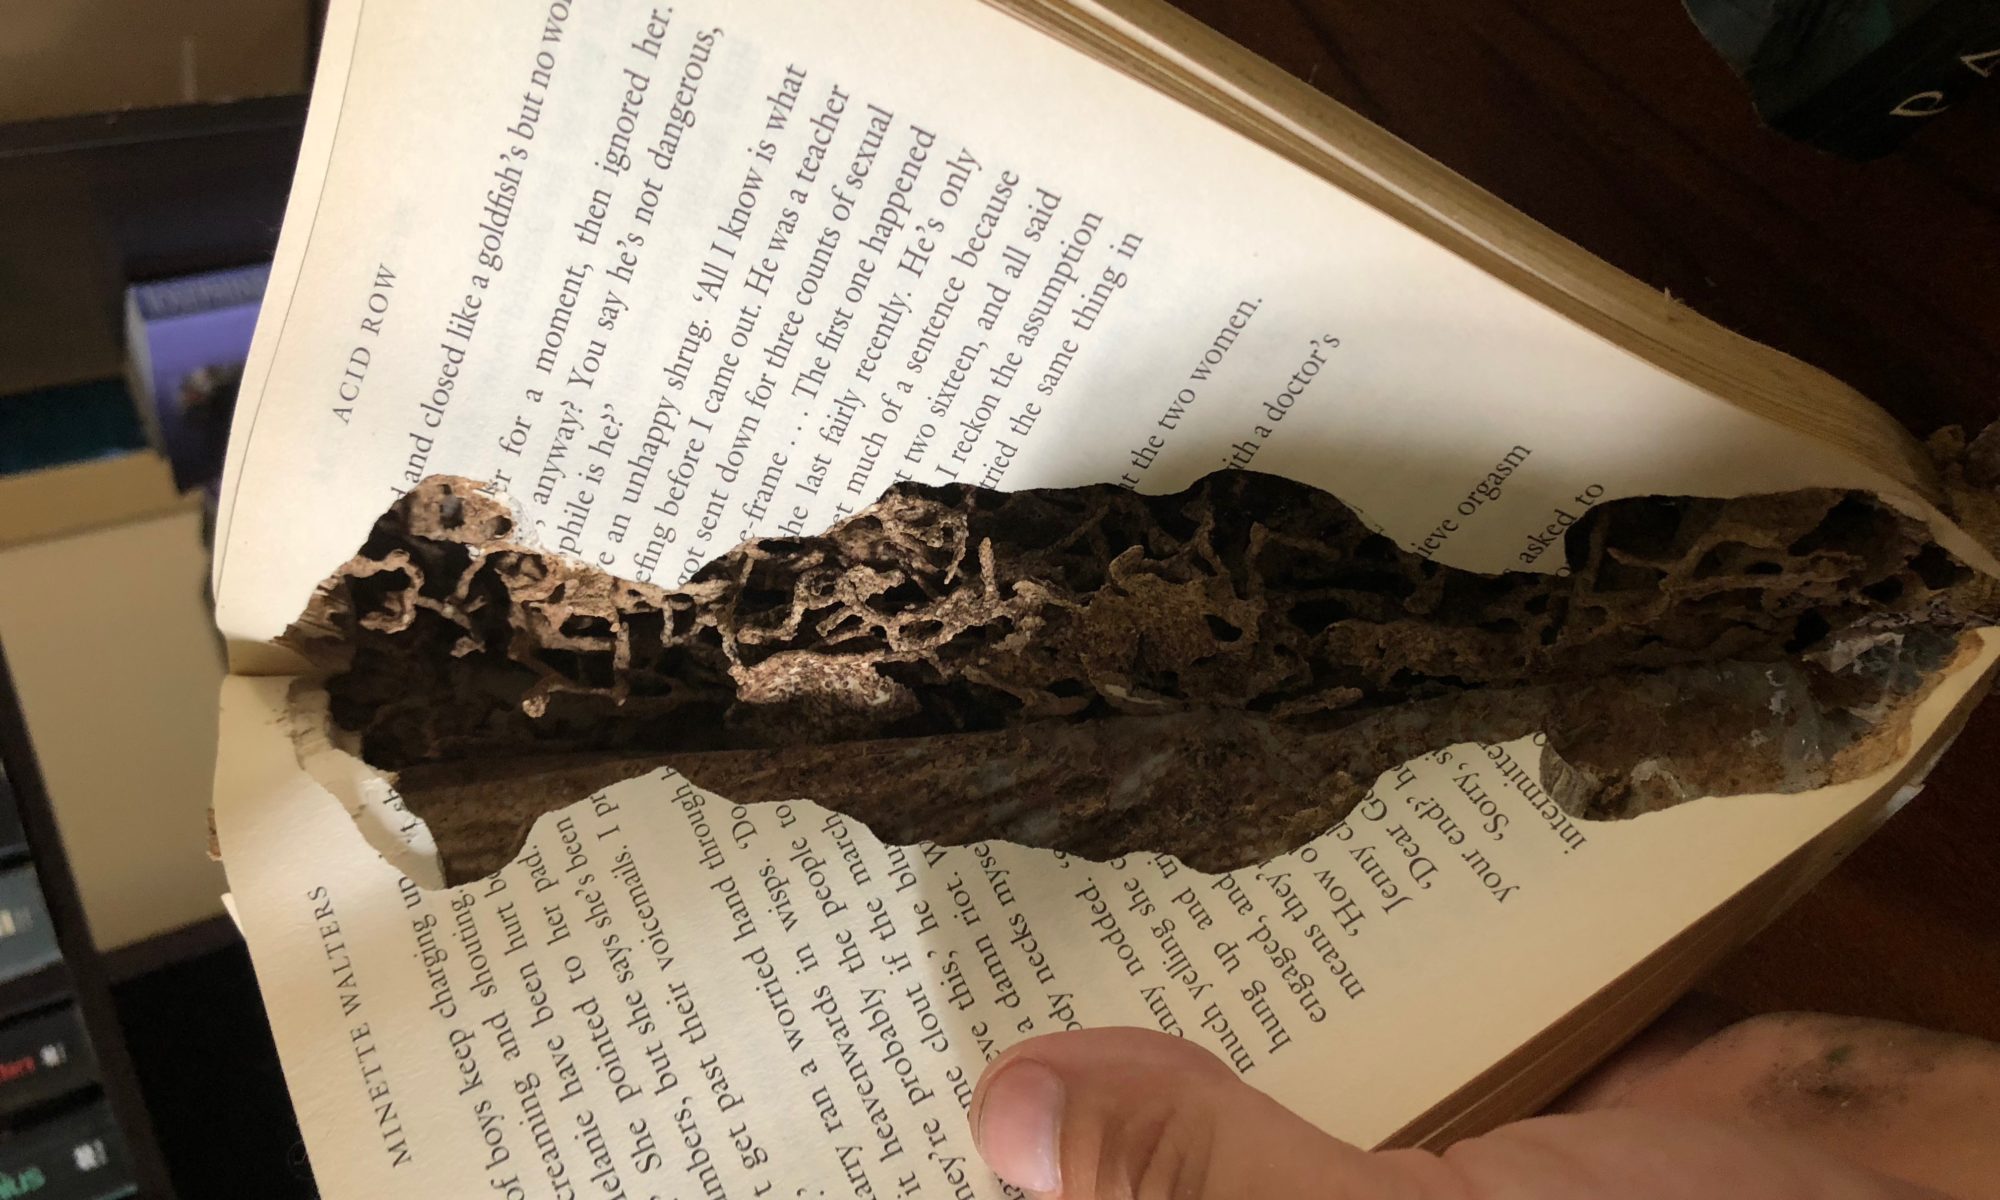 Termites eaten through the gyprock and started eating into the books on my clients book case